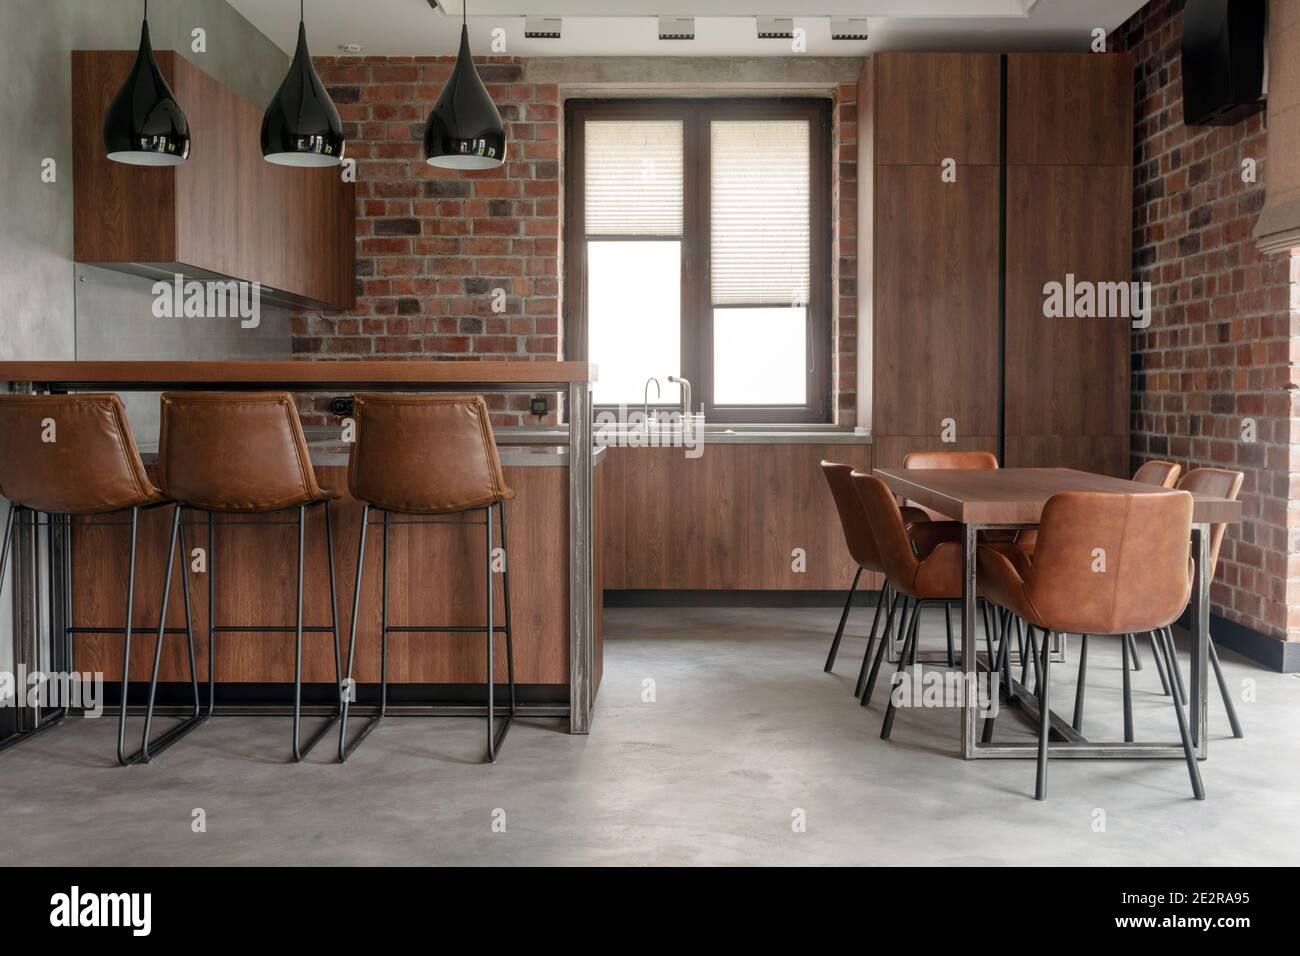 Contemporary interior design of light spacious dinning room including brown wooden furniture with bar stools at counter and soft comfortable chairs at Stock Photo